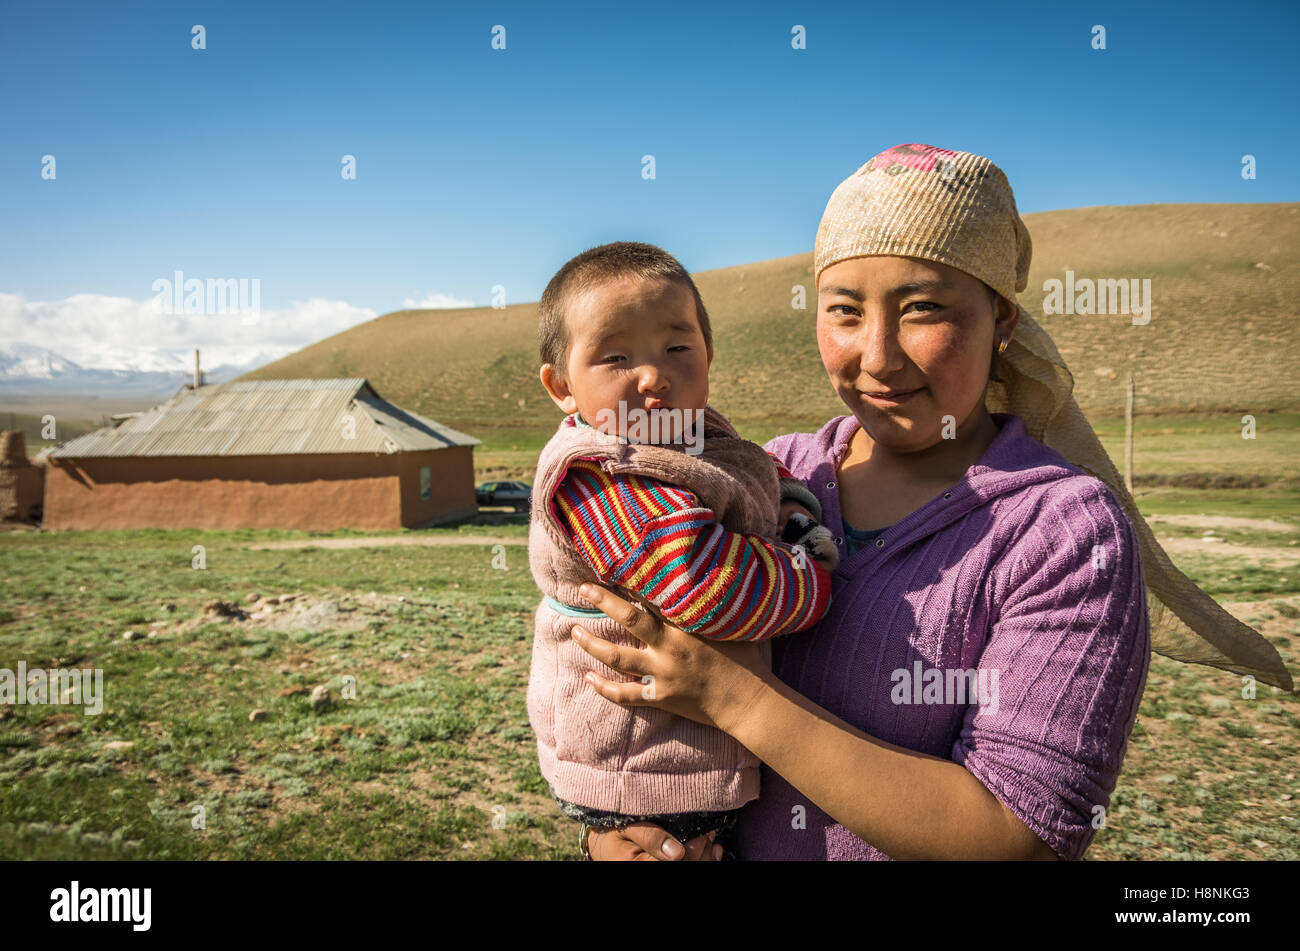 Alay Valley People Stock Photo